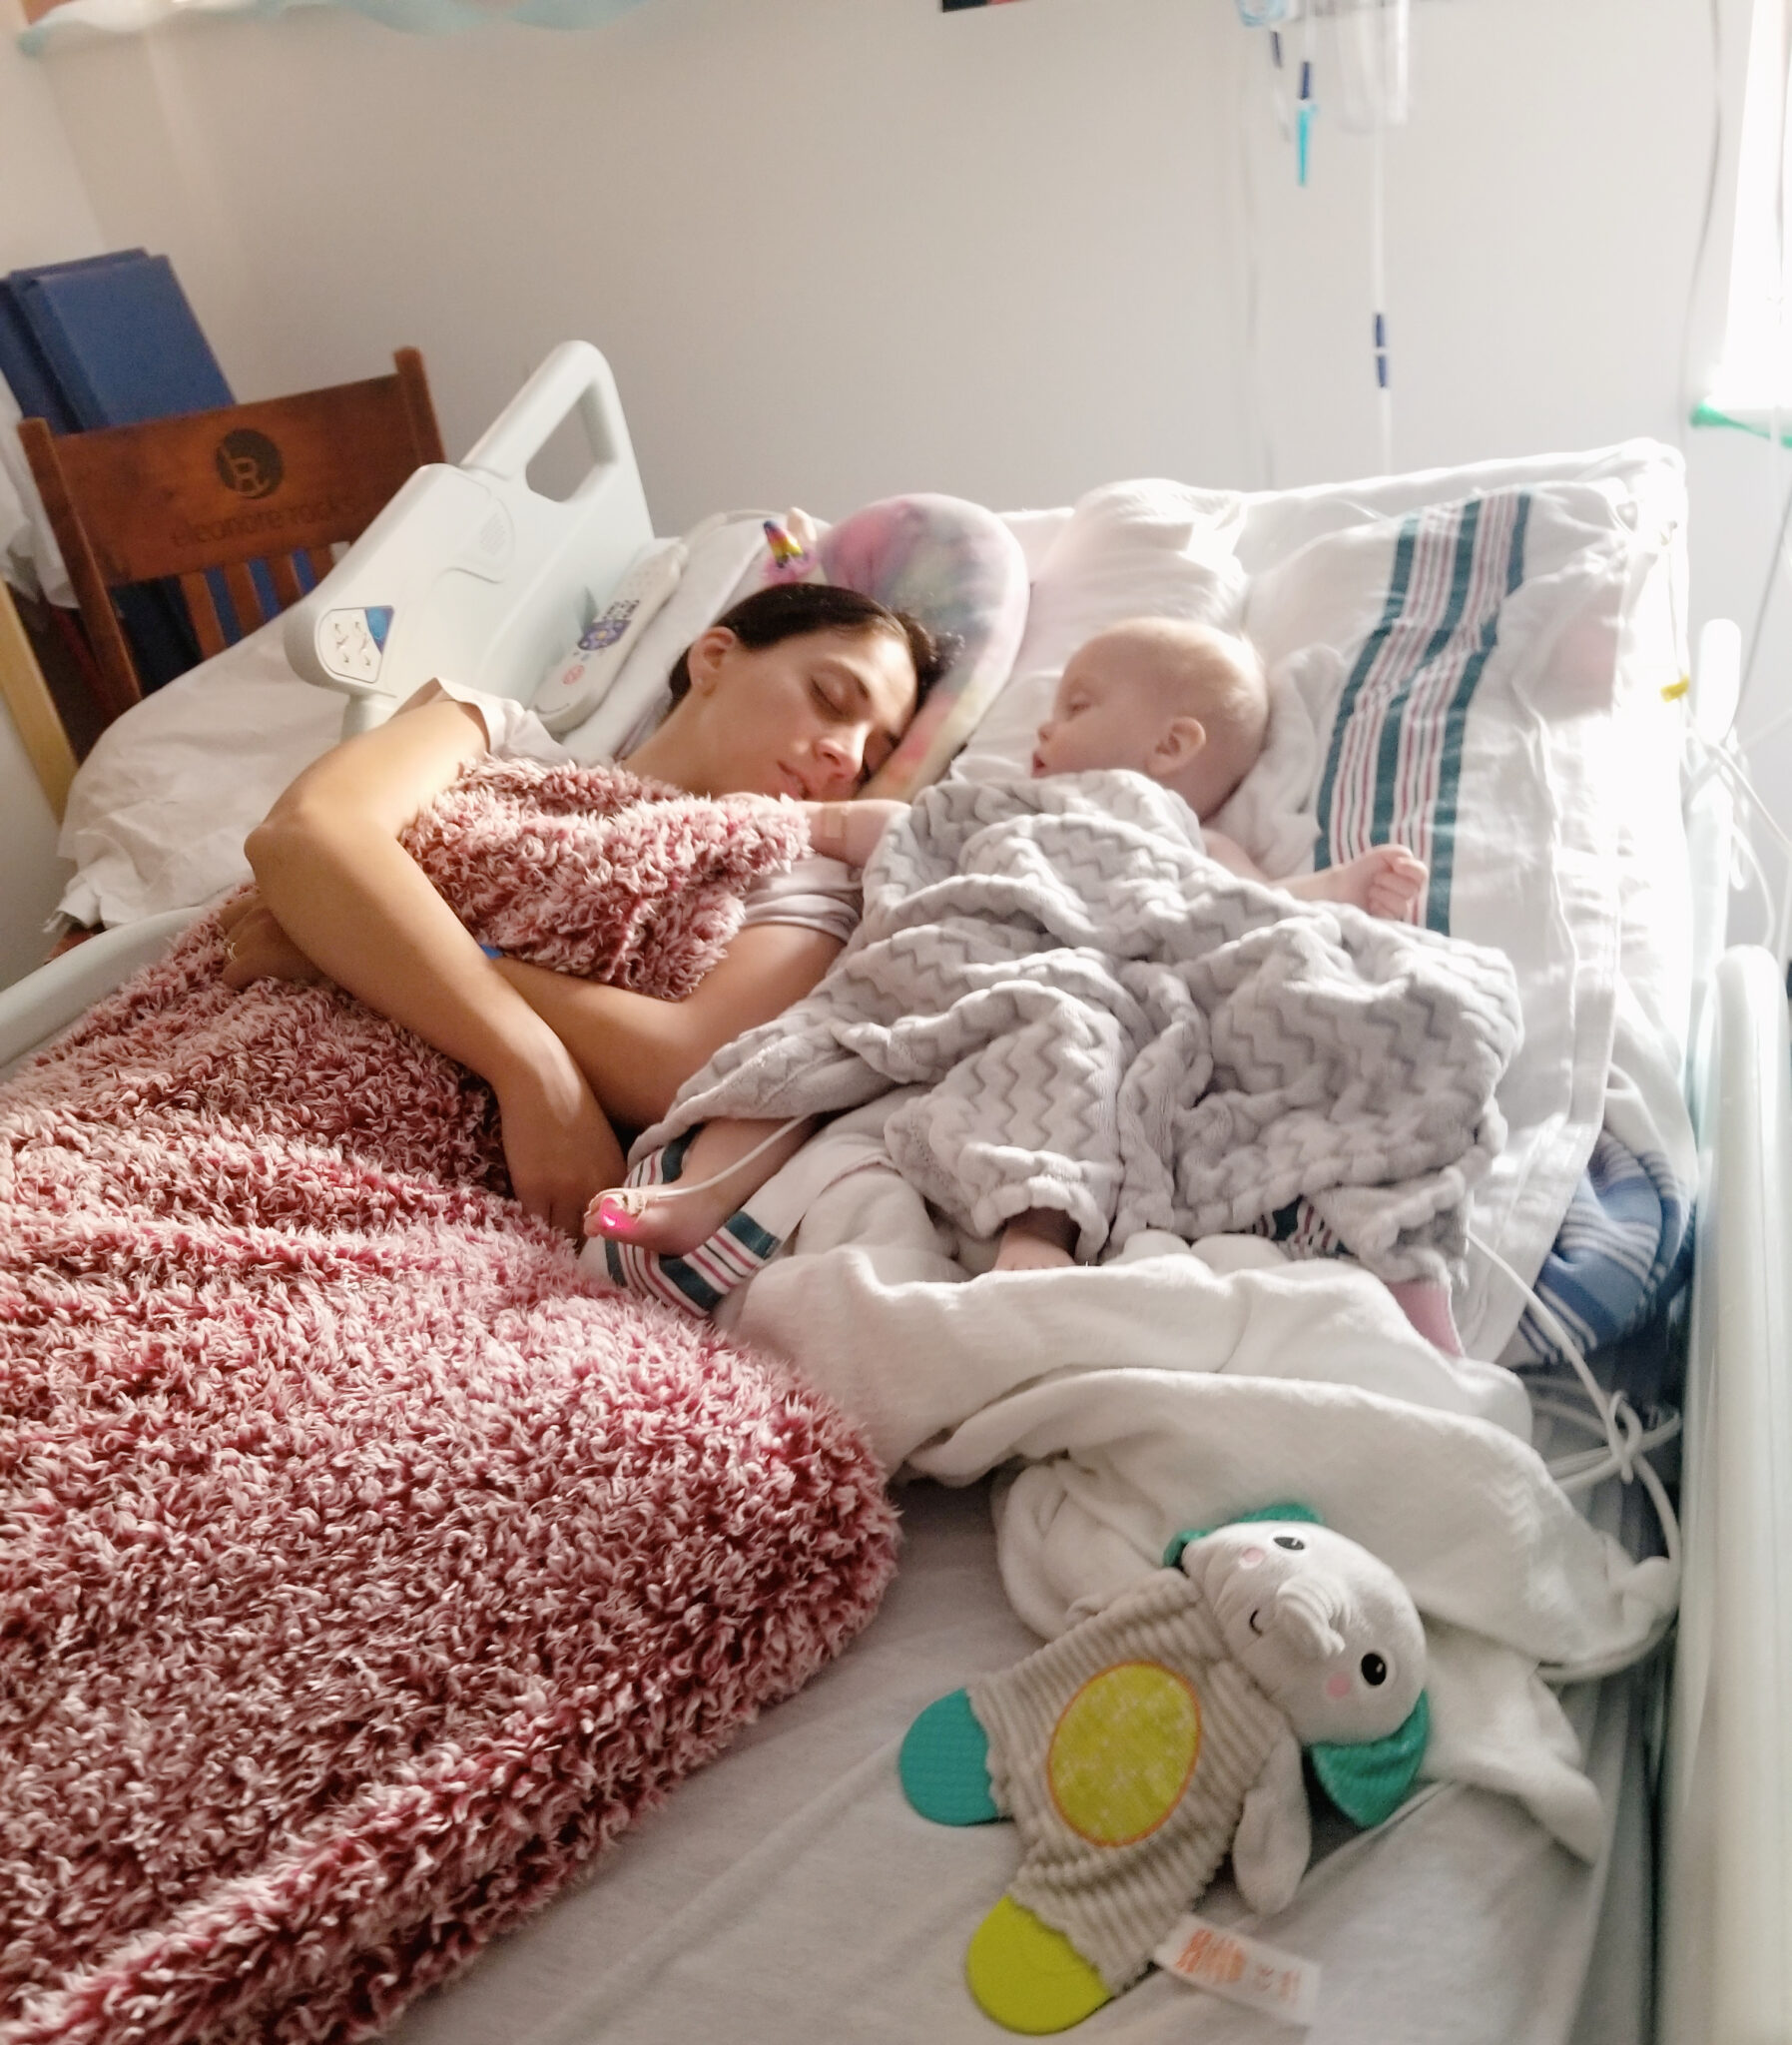 Mom laying with her infant son in hospital bed